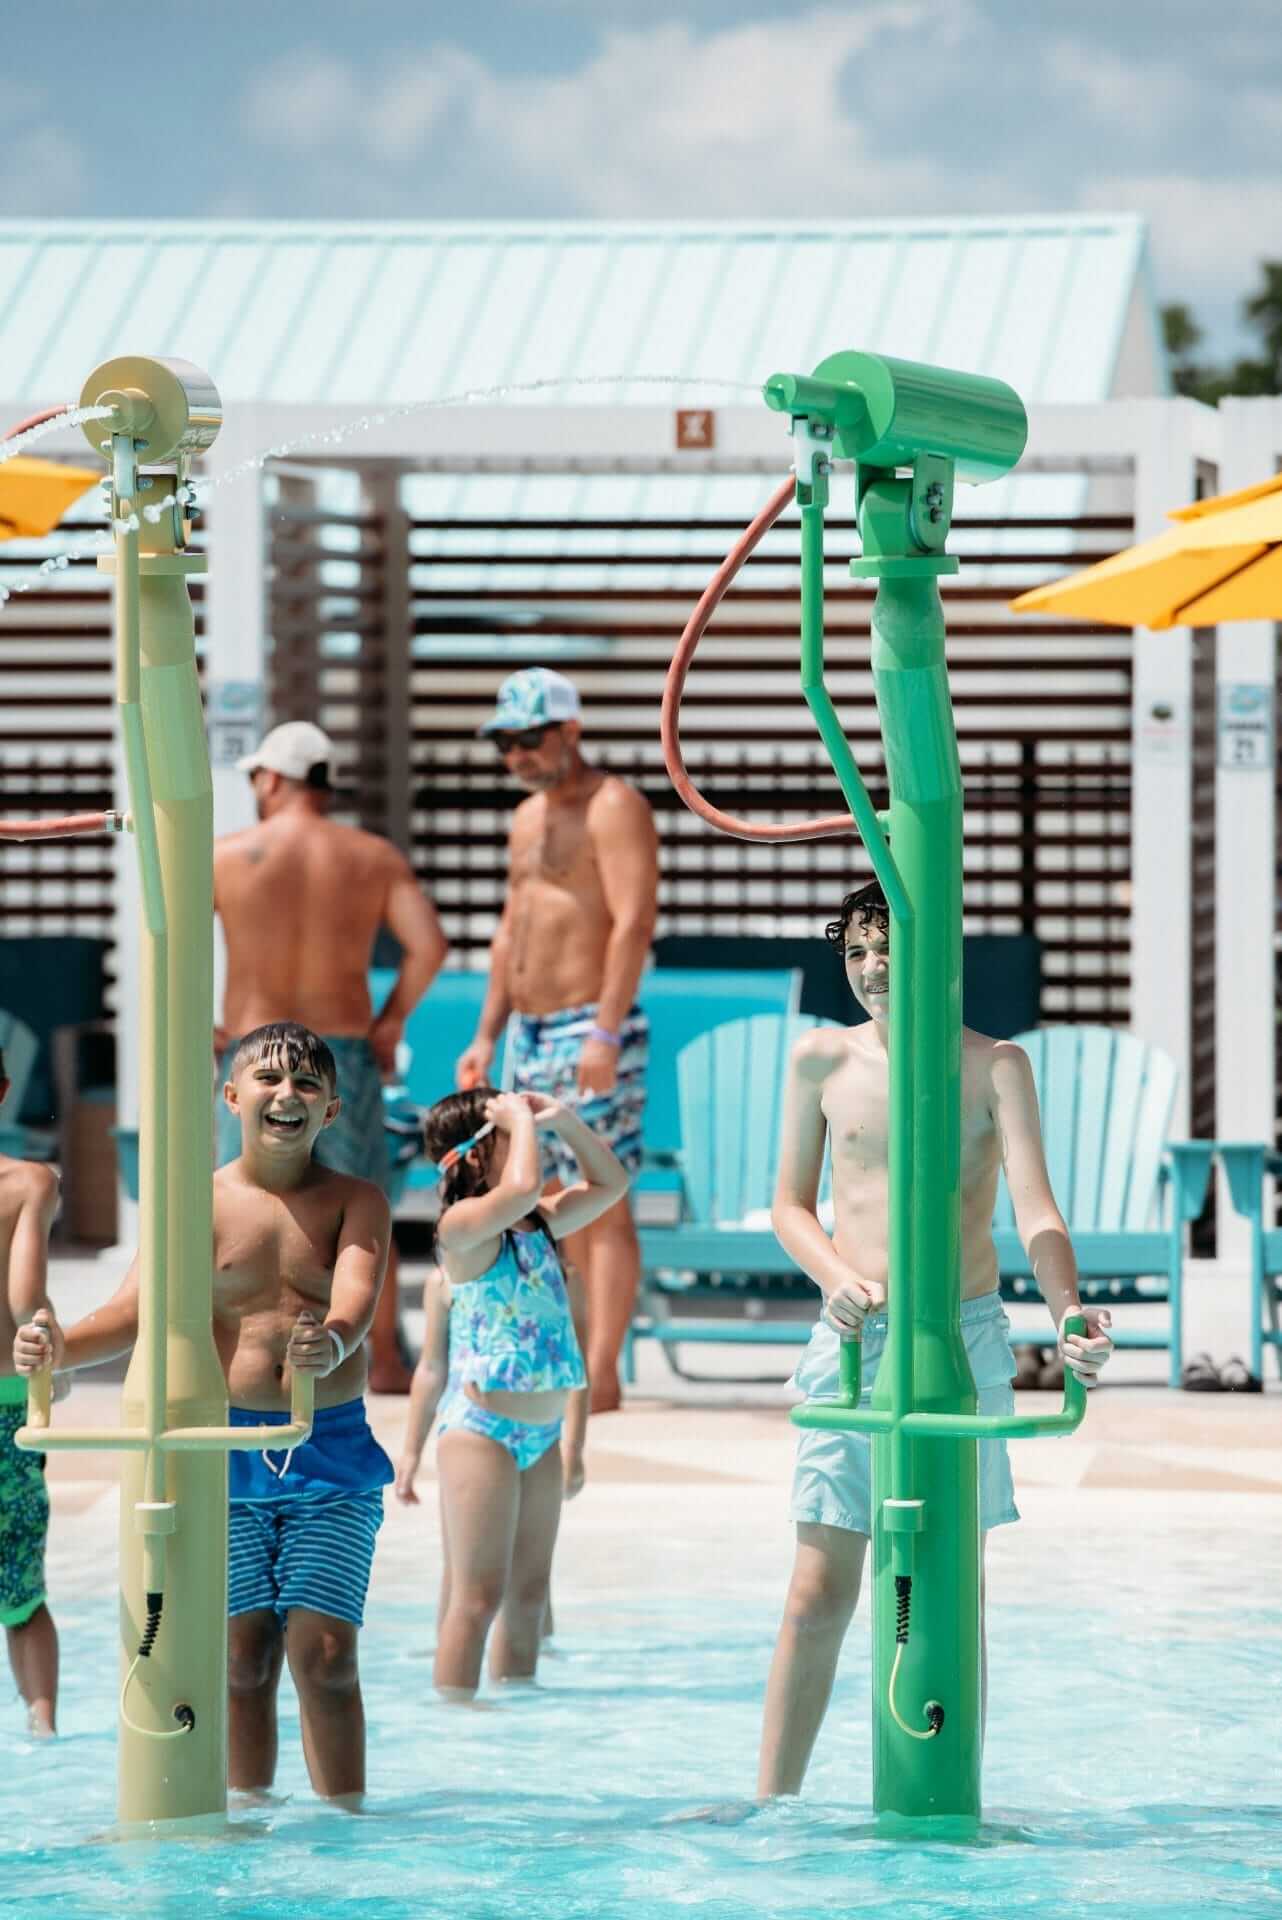 Two teen boys point the beanstalk water blasters at other water players and participate in water wars at the water play structure by Interactive Play at the Camp Margaritaville in Henderson Louisiana.